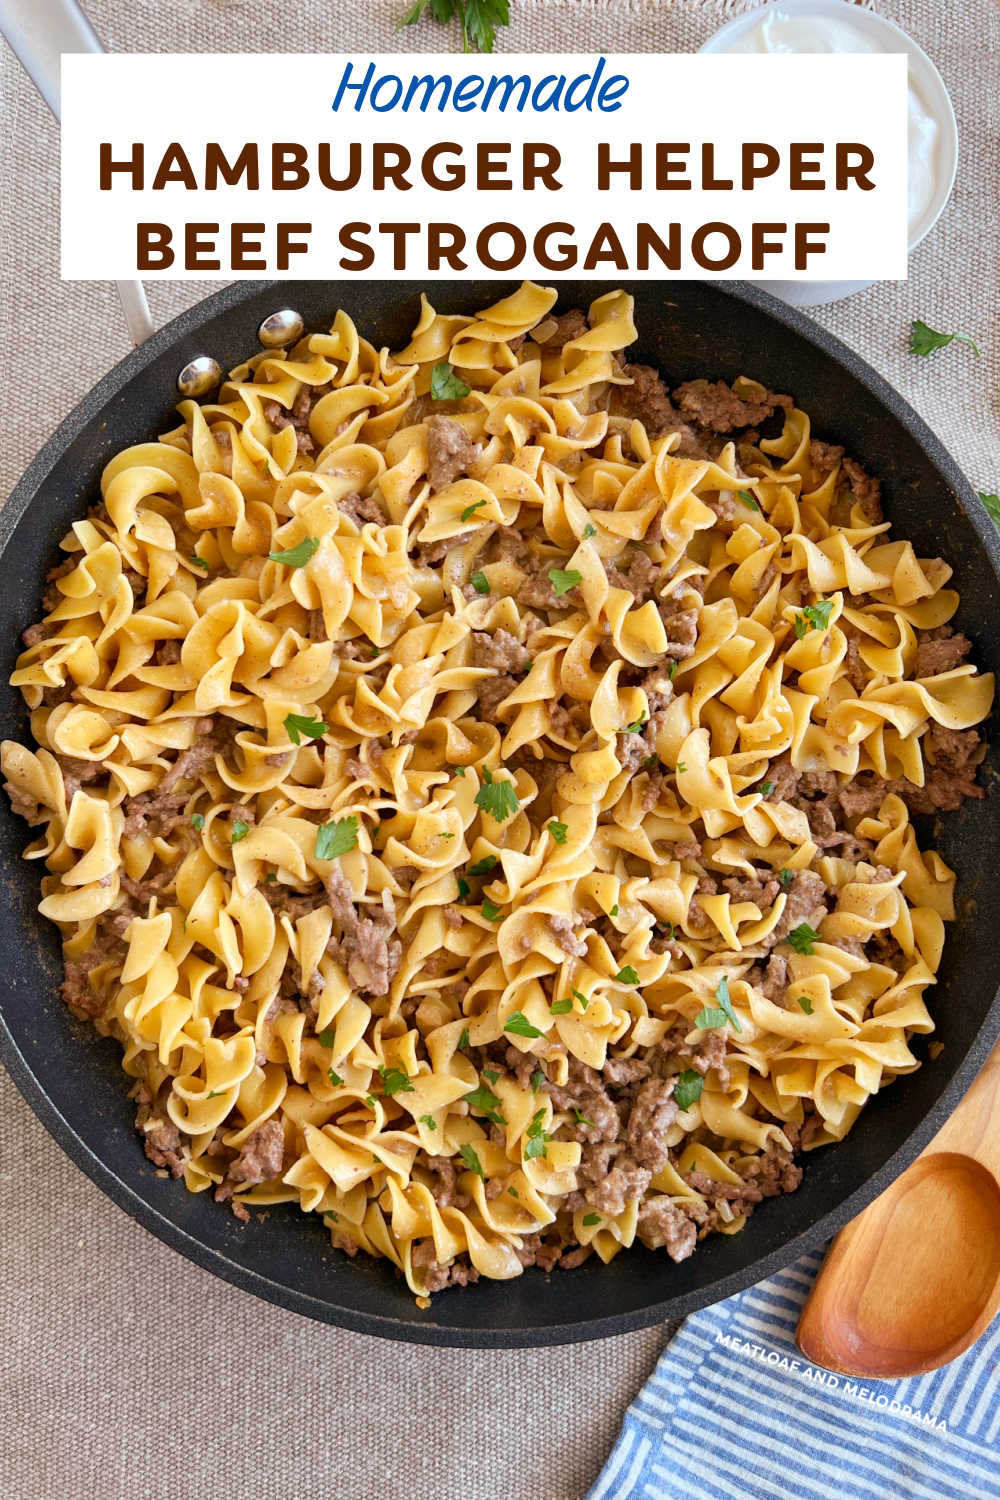 Homemade Hamburger Helper Beef Stroganoff with ground beef and tender egg noodles is a quick dinner the whole family loves. A 30 minute meal perfect for busy weeknights! via @meamel